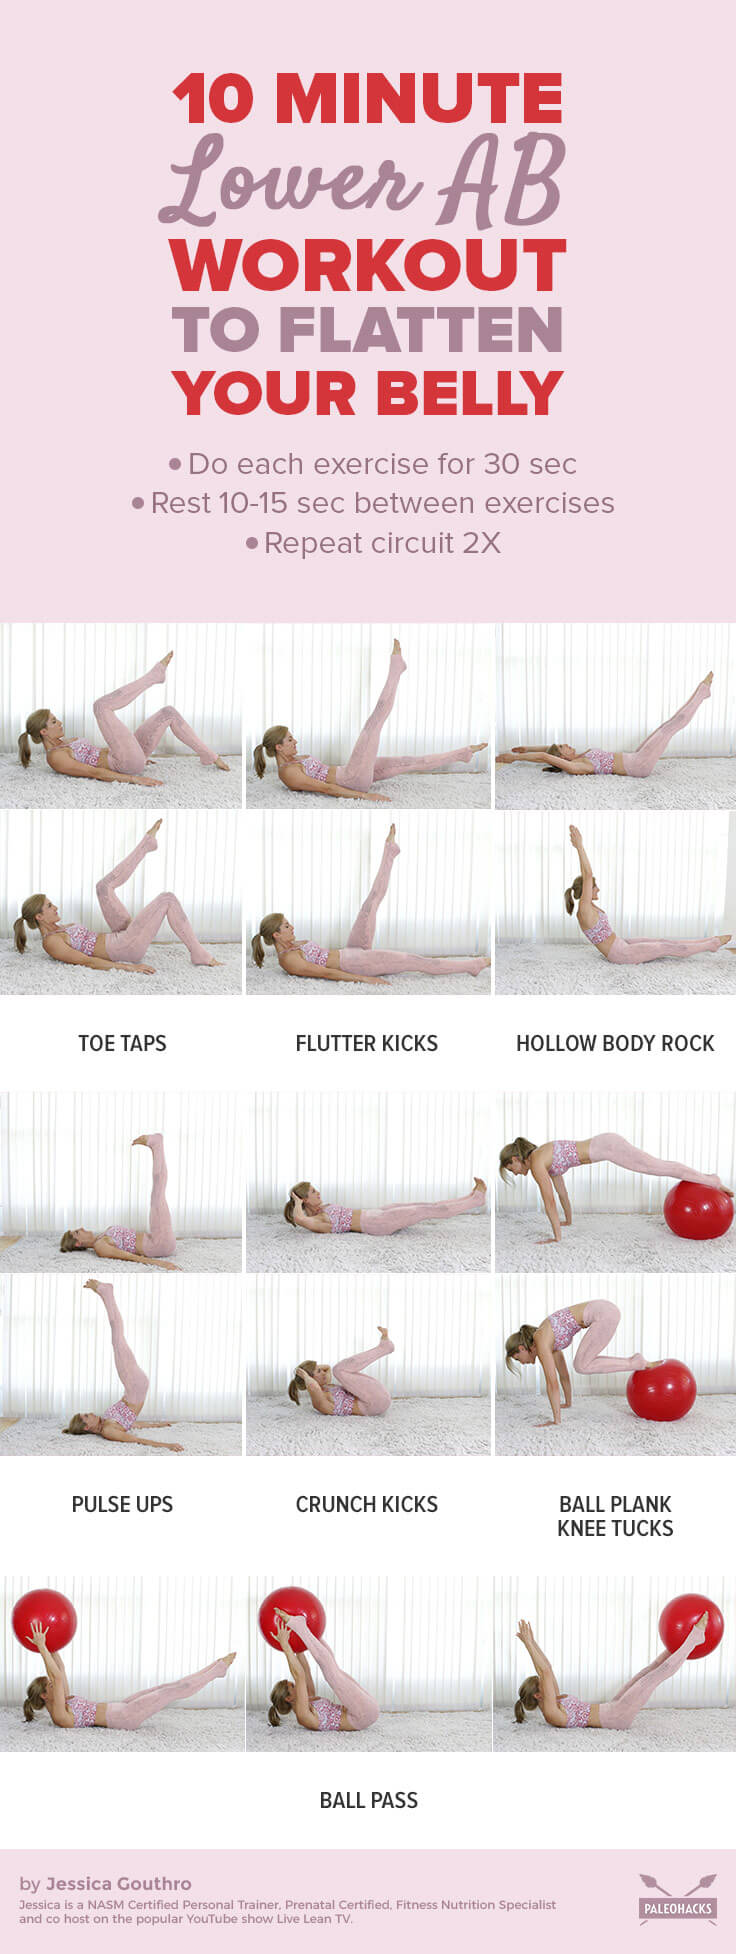 These moves target your lower belly for a tight and toned midsection.